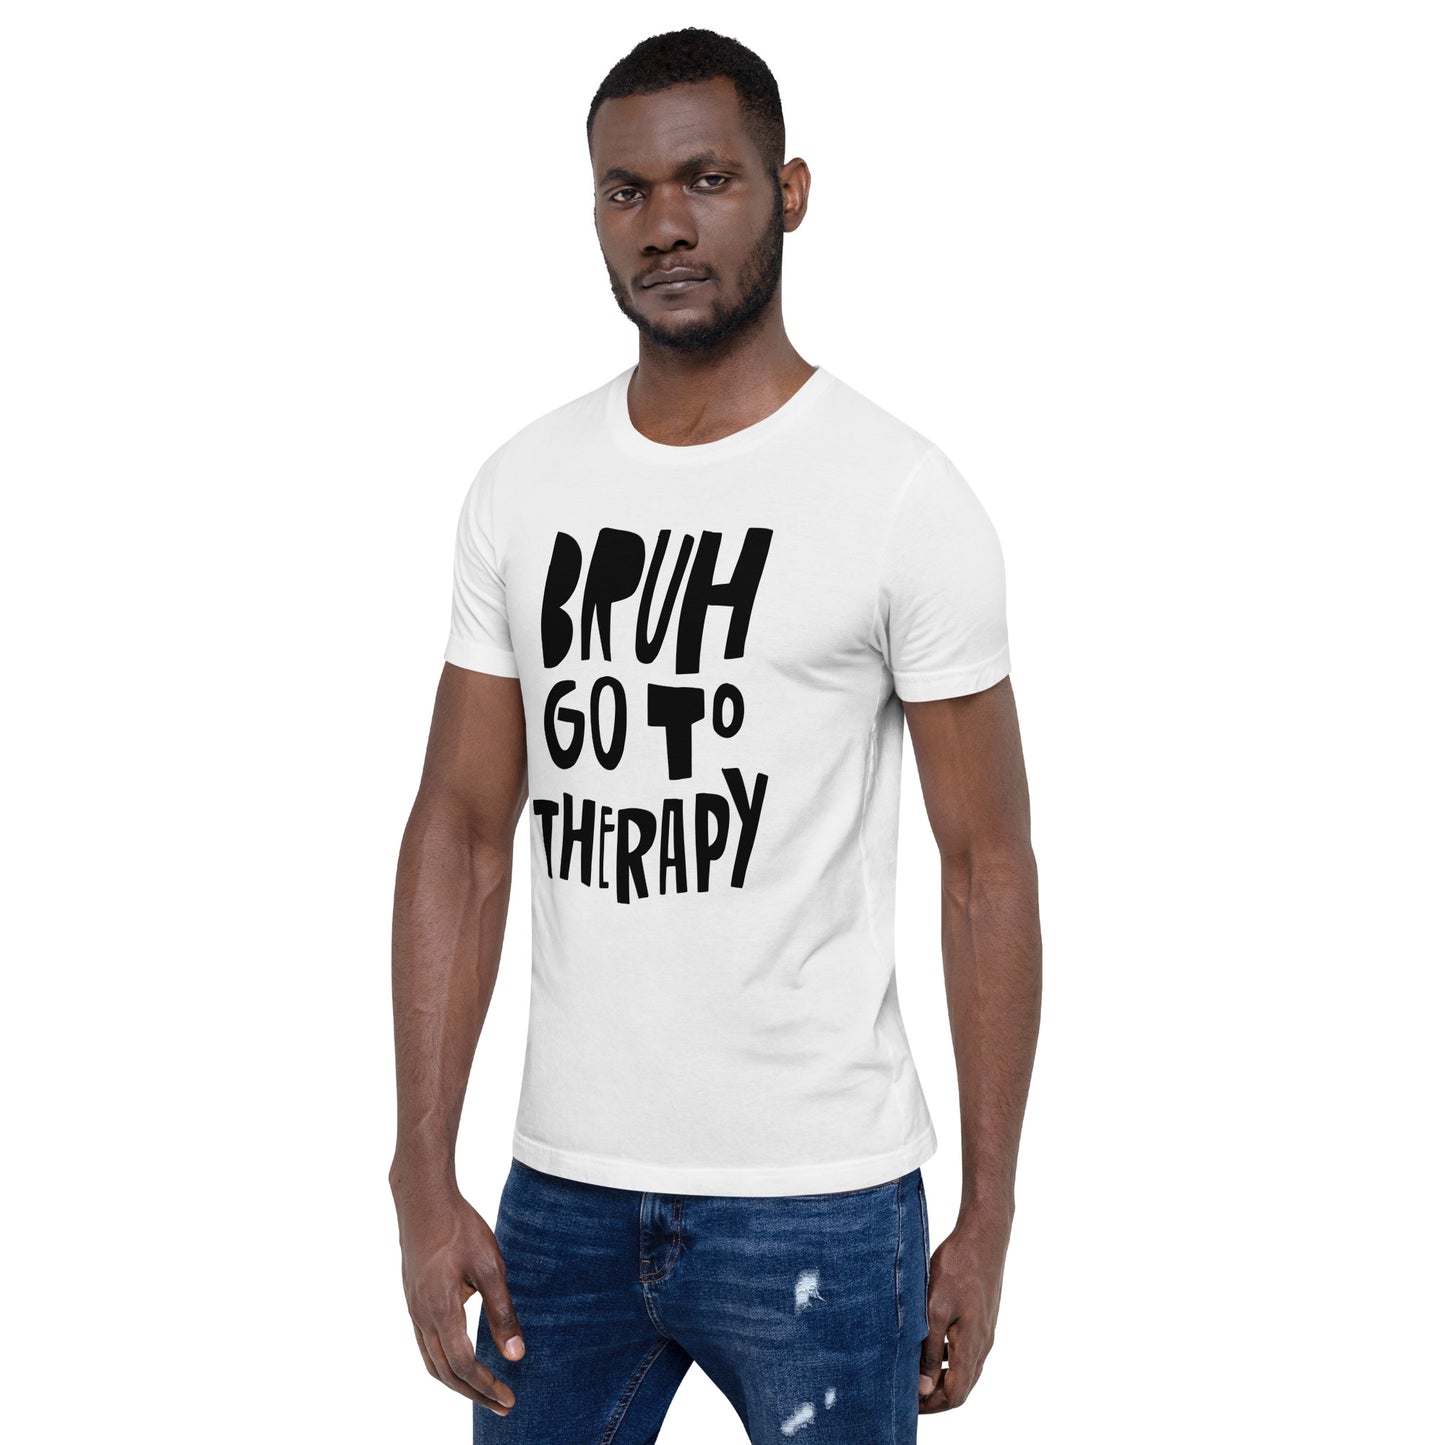 "Bruh Go To Therapy" Unisex Tee